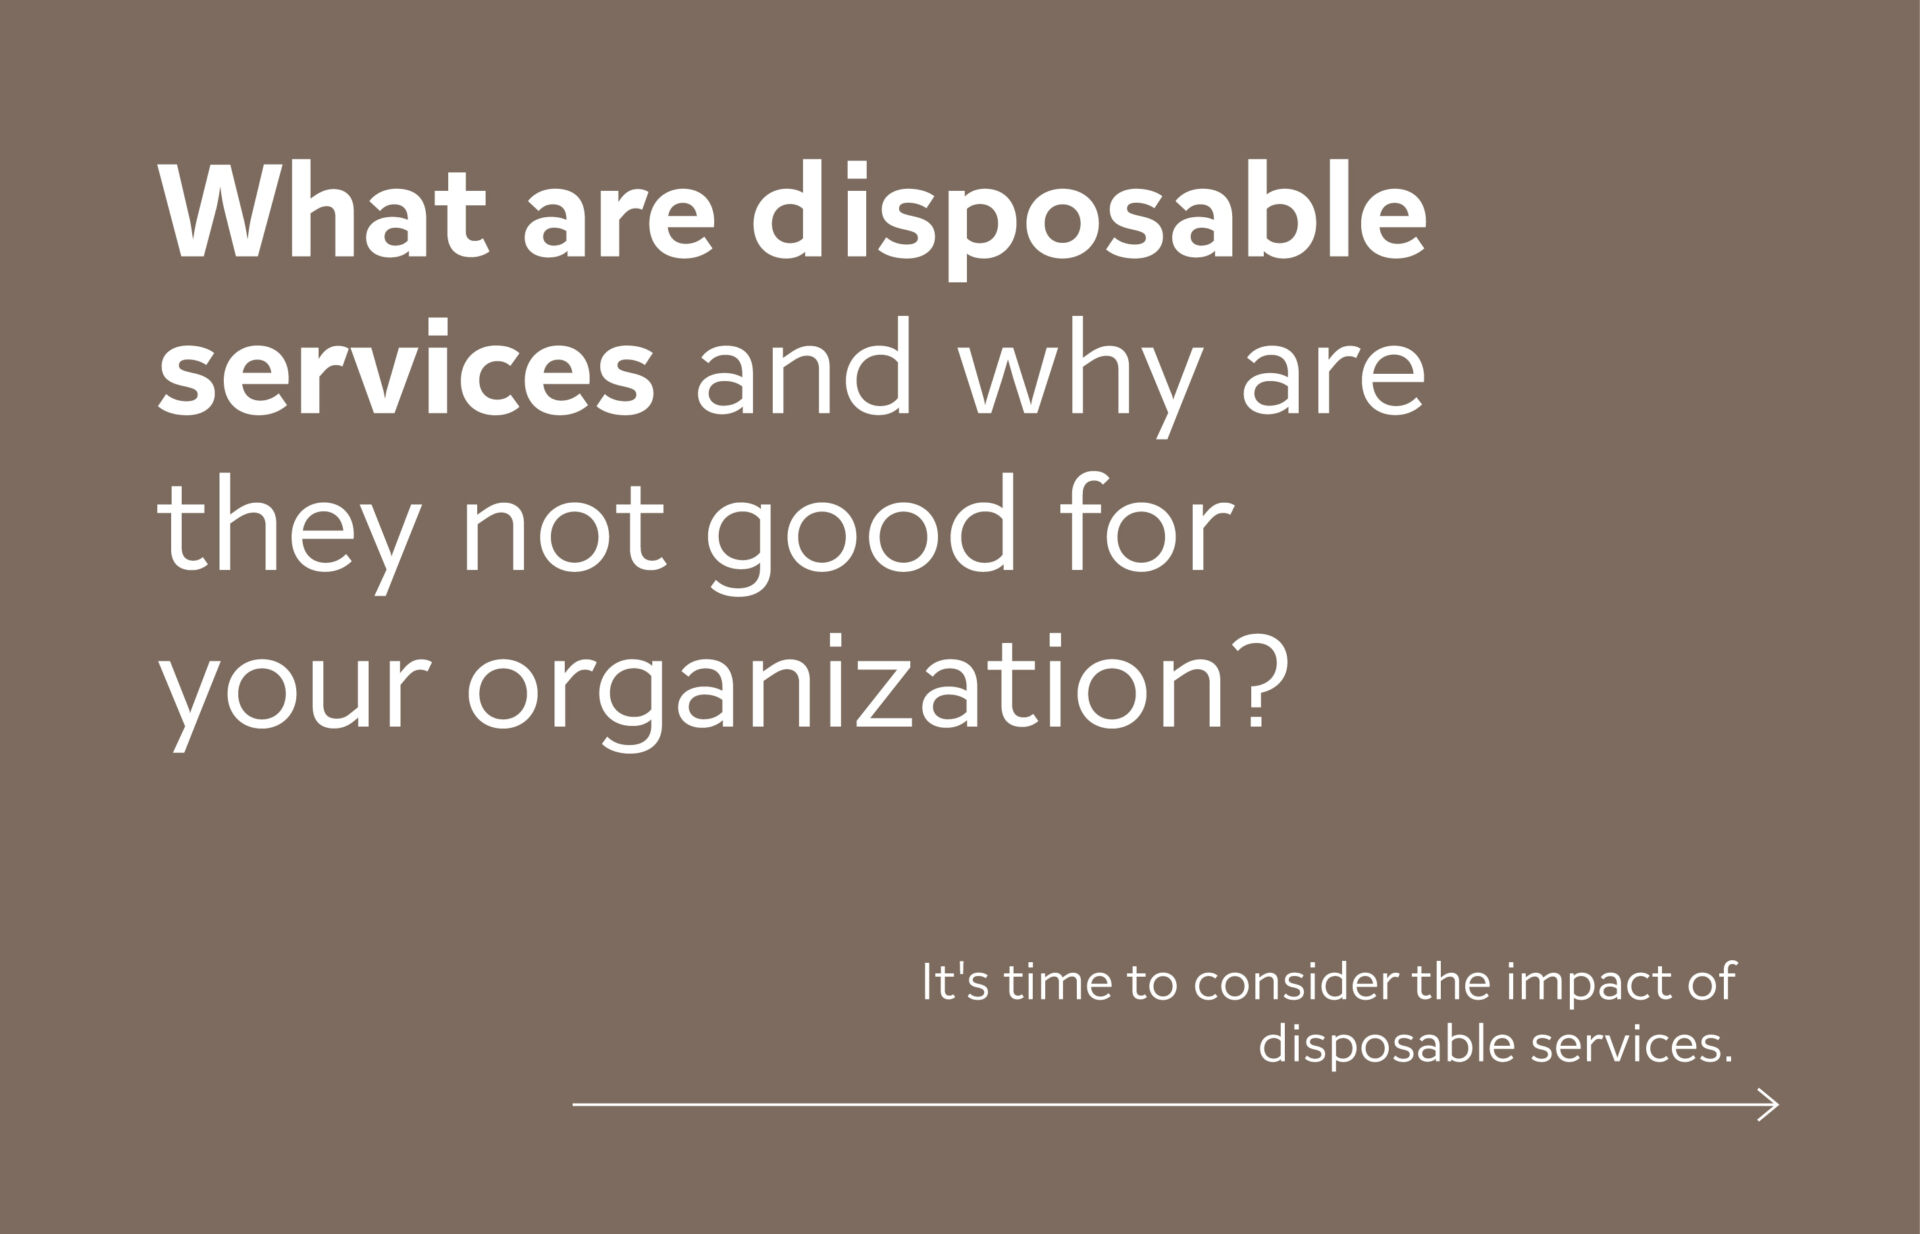 what are disposable services and why are they not good for your organization?